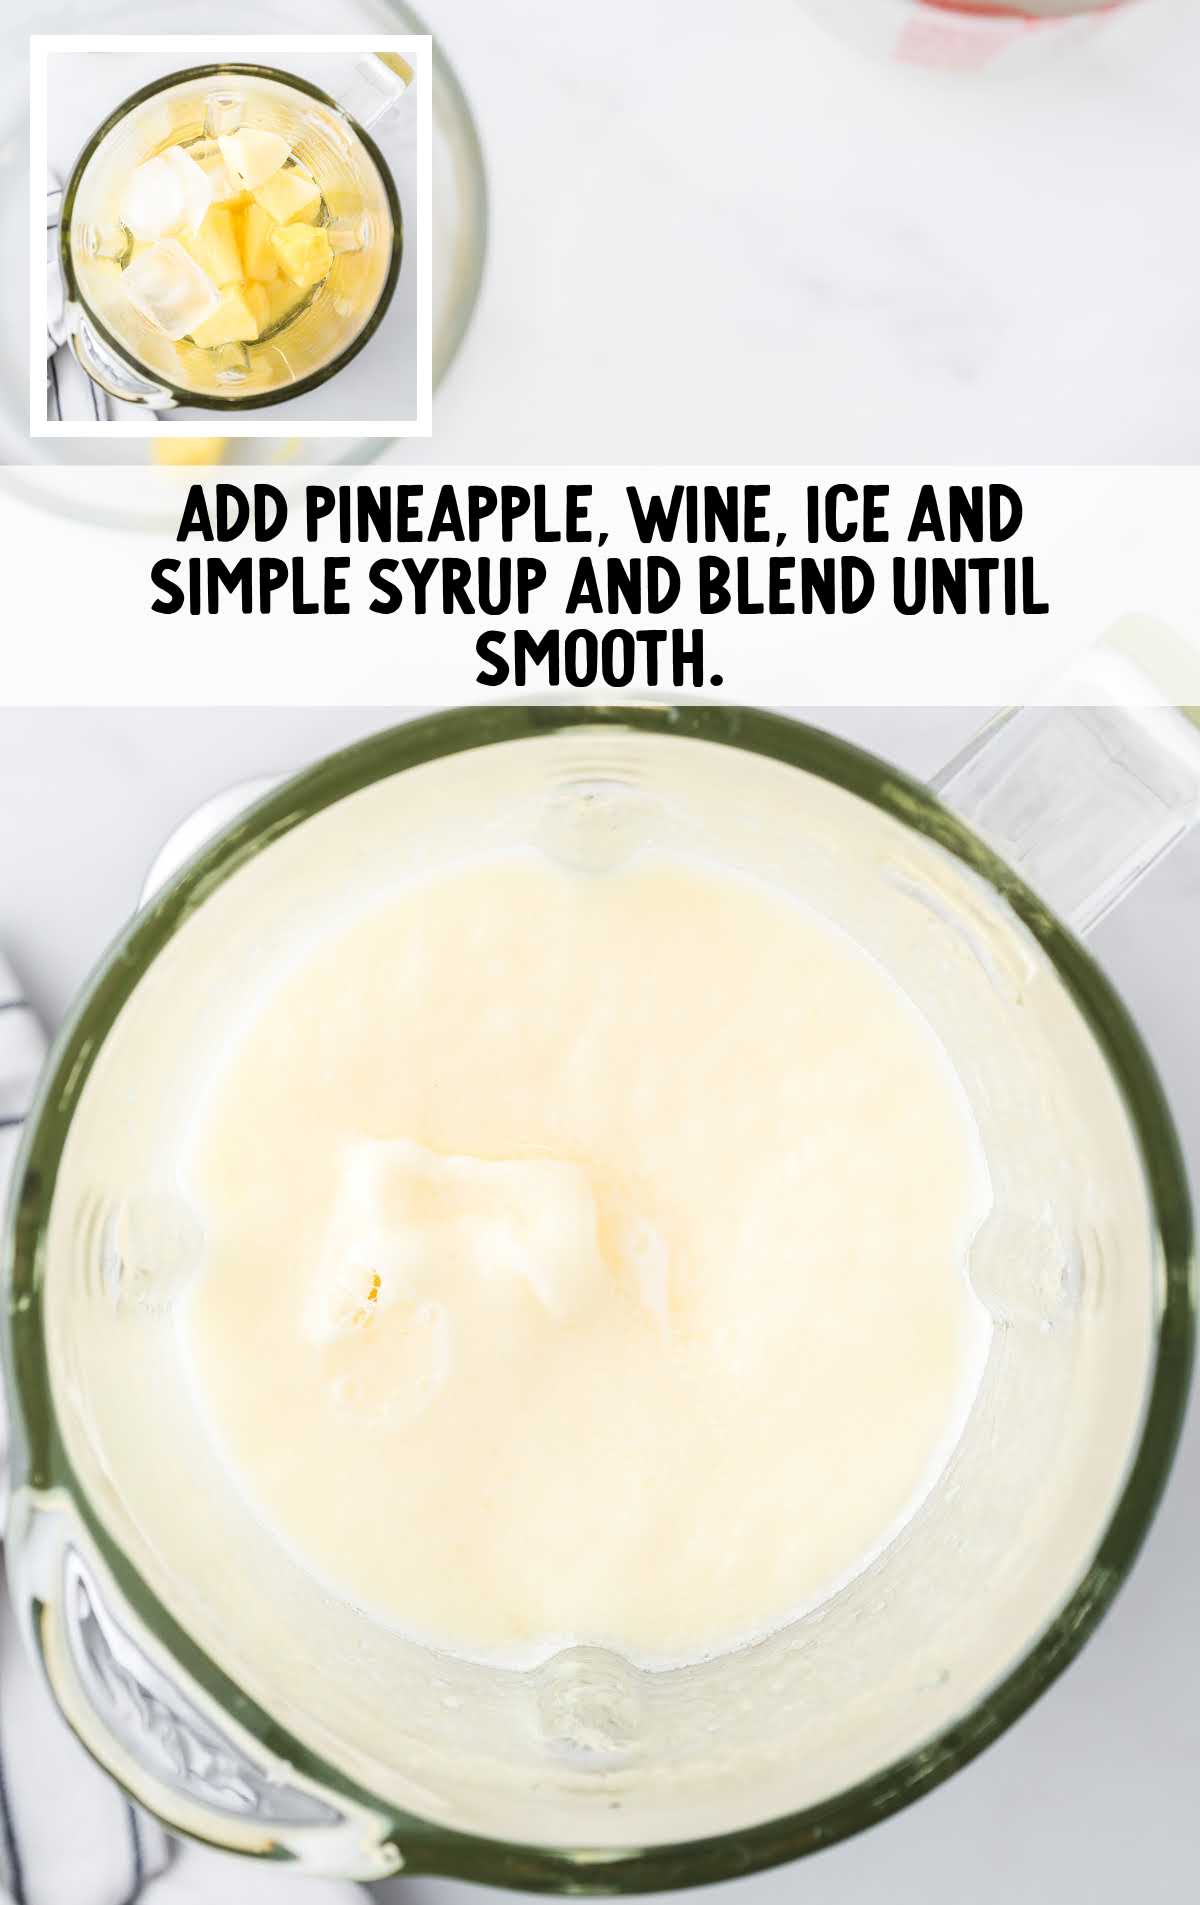 pineapple, wine, ice and syrup added and blended together